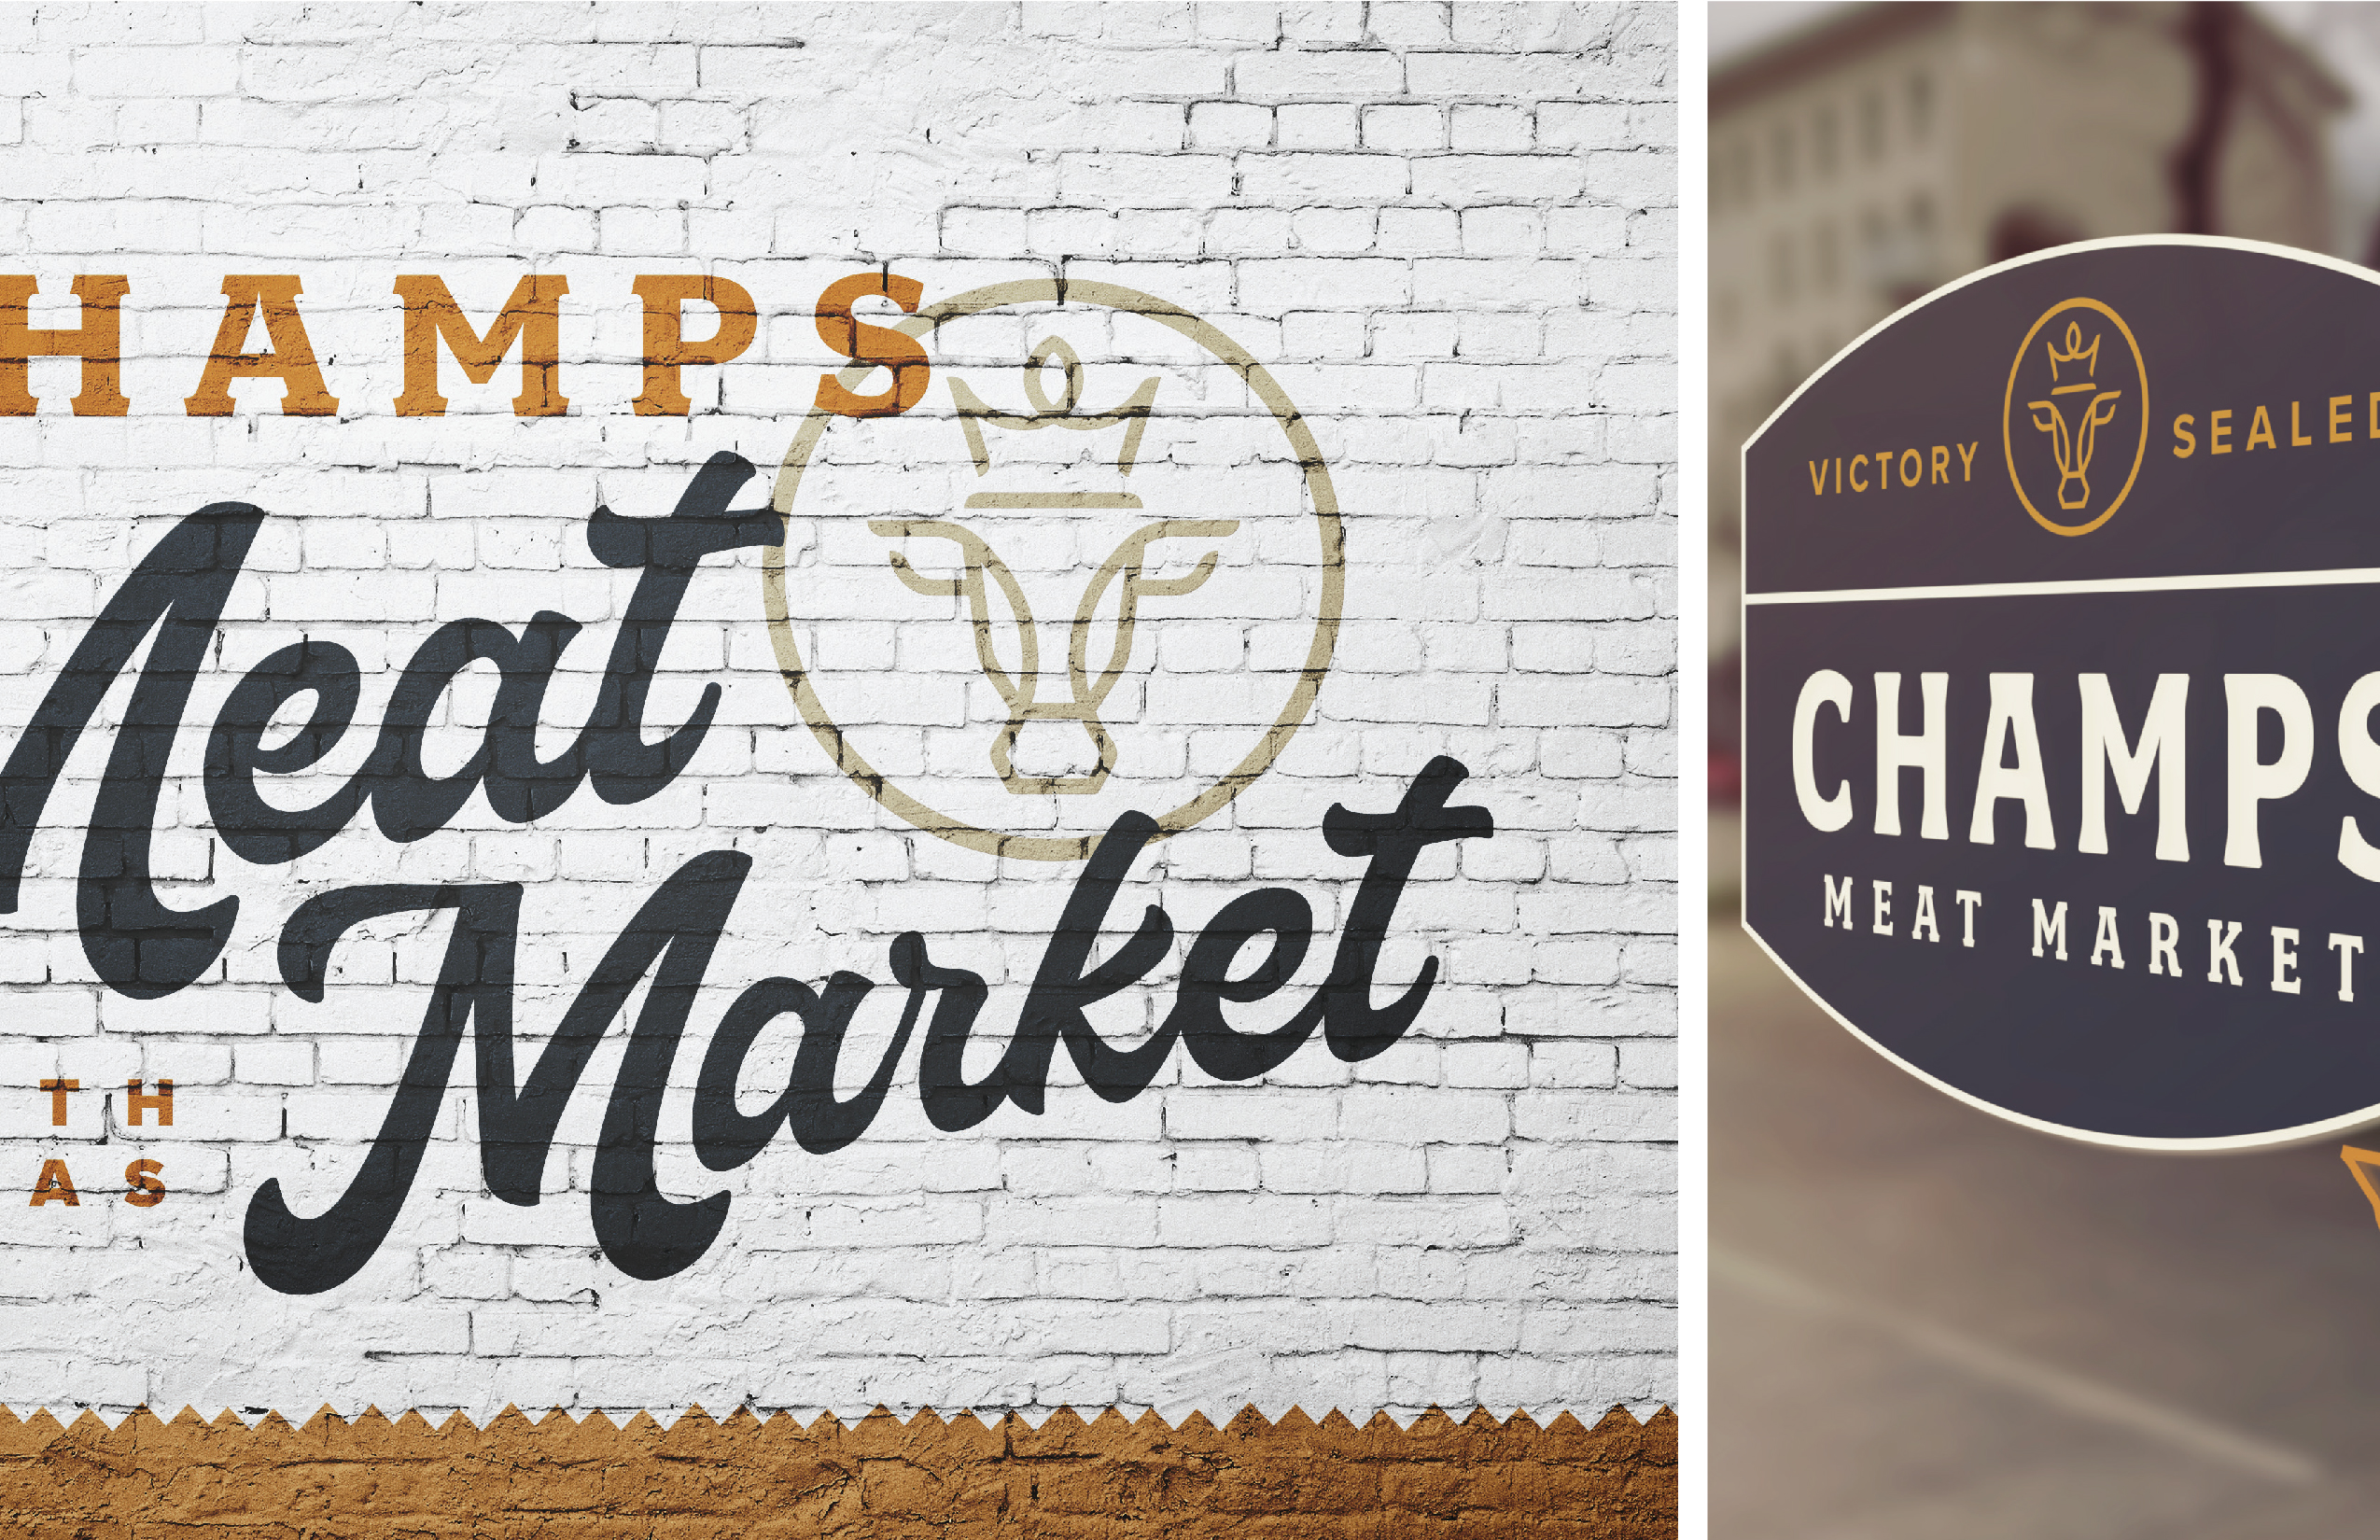 Showing the Champs Meat Market logo painted on a large wall mural.